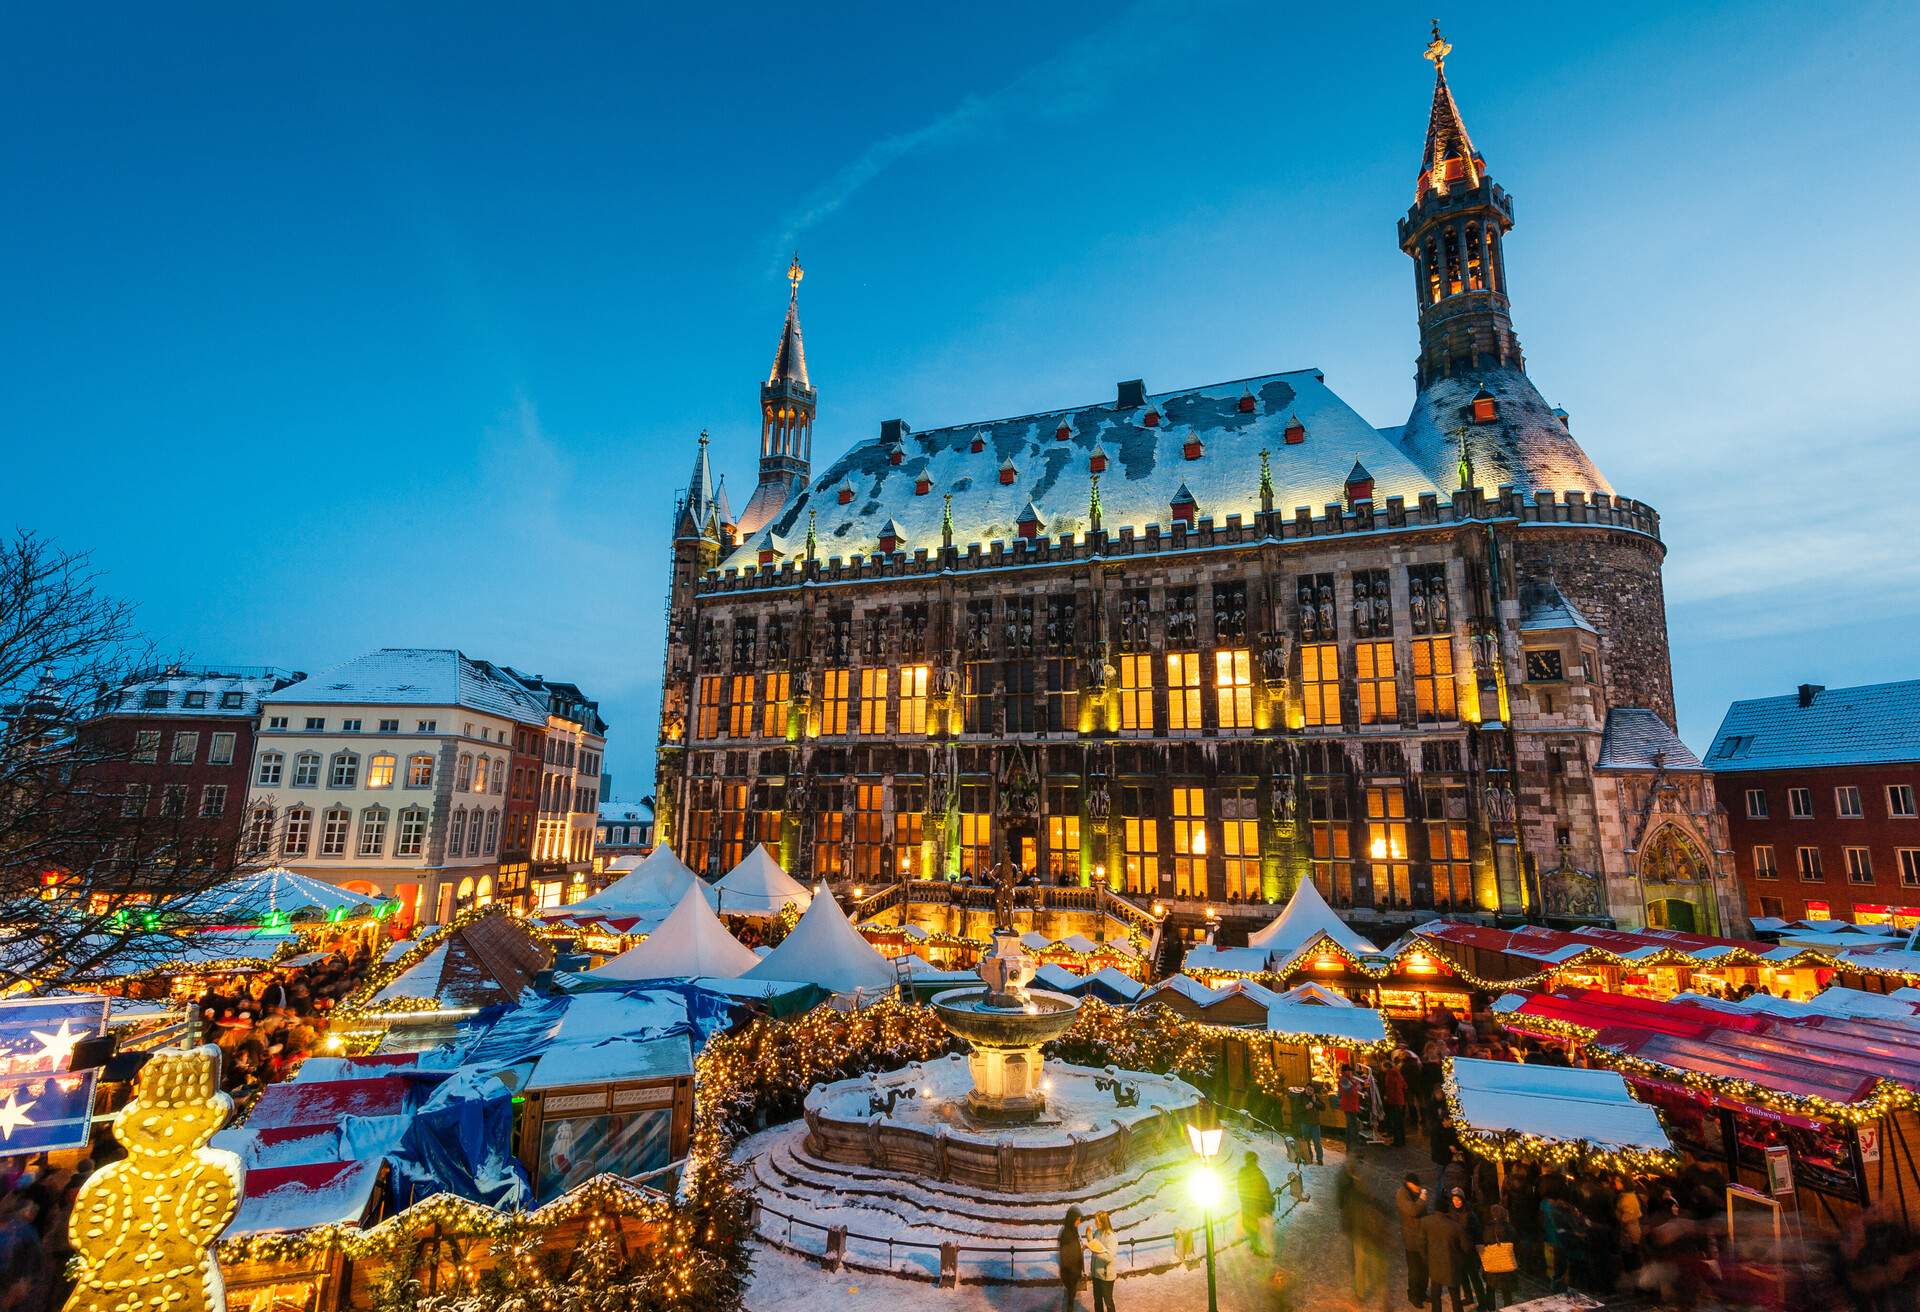 DEST_GERMANY_CHRISTMAS_MARKET_AACHEN_GettyImages-1001727958